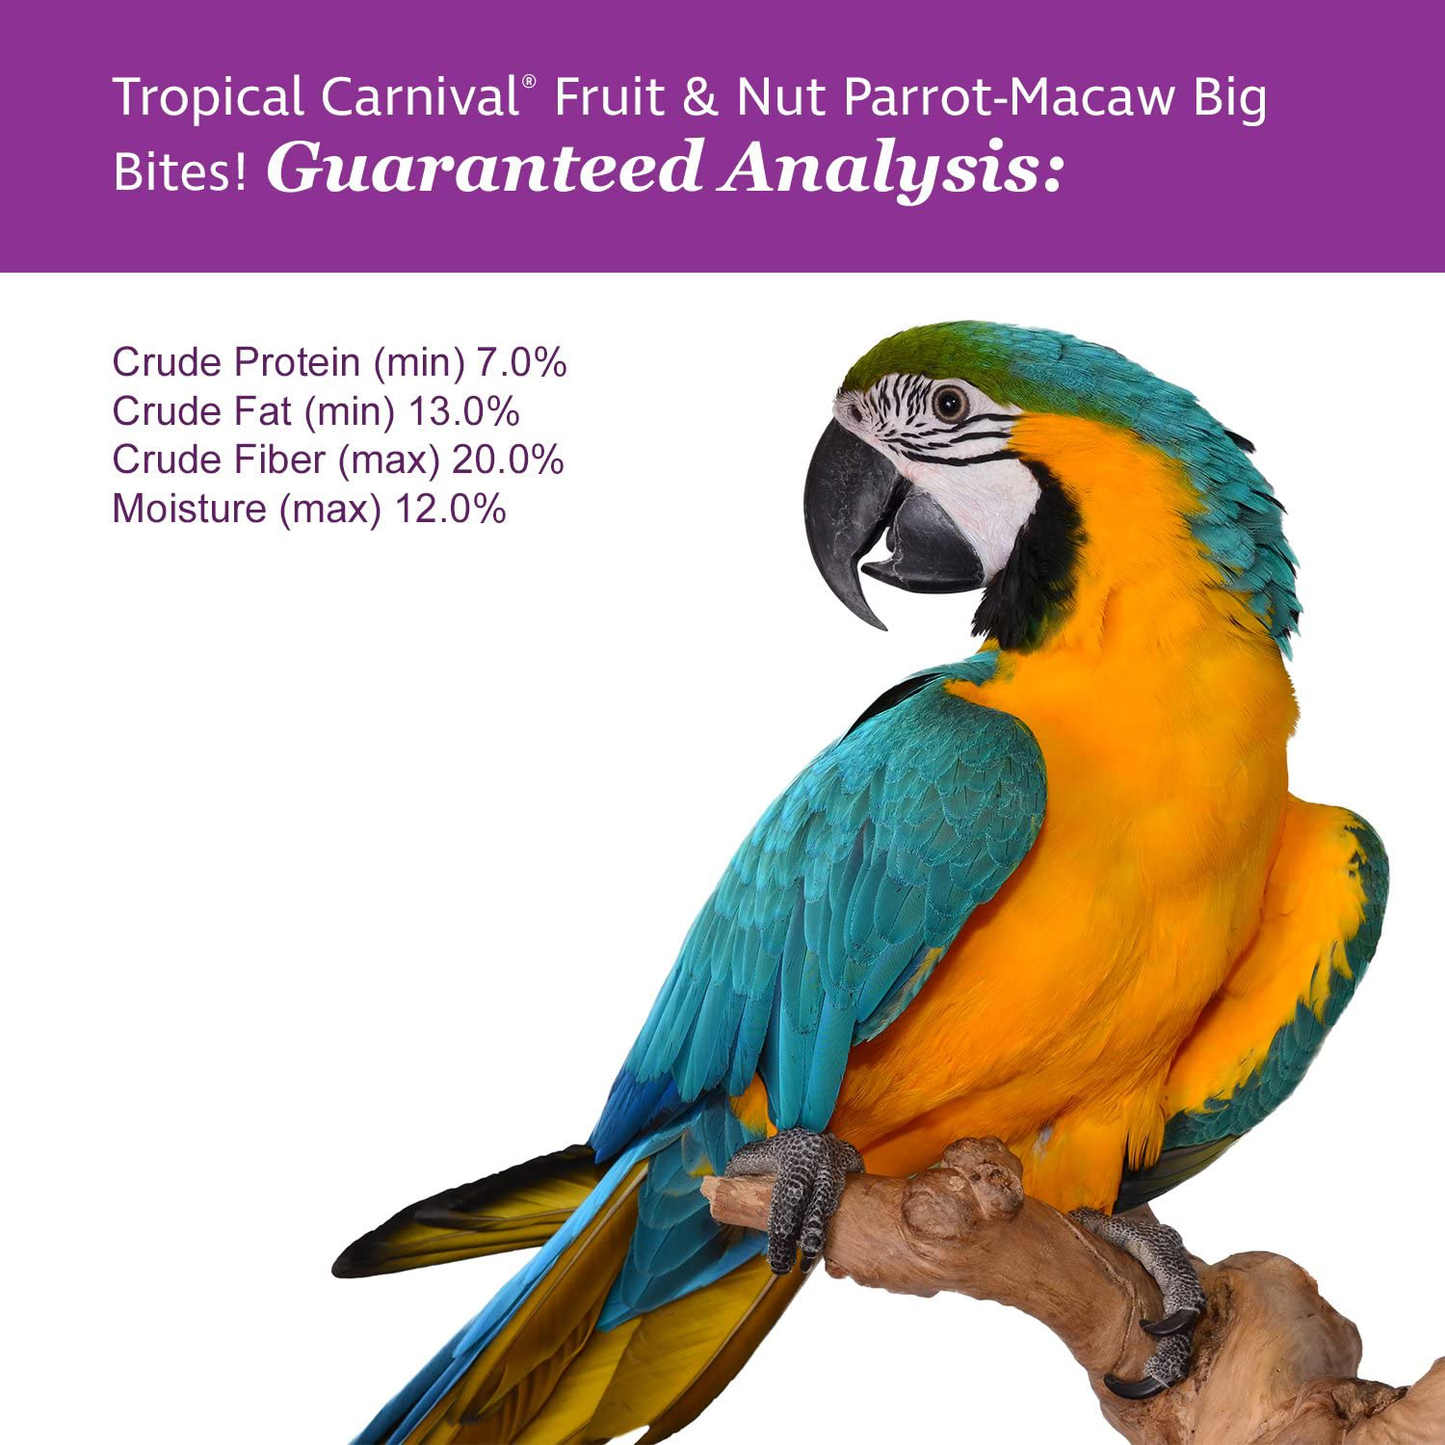 F.M. Brown'S Tropical Carnival Fruit and Nut Parrot-Macaw Big Bites. 10 Oz Bag - Foraging Treat with Fruits, Veggies, and In-Shell Nuts